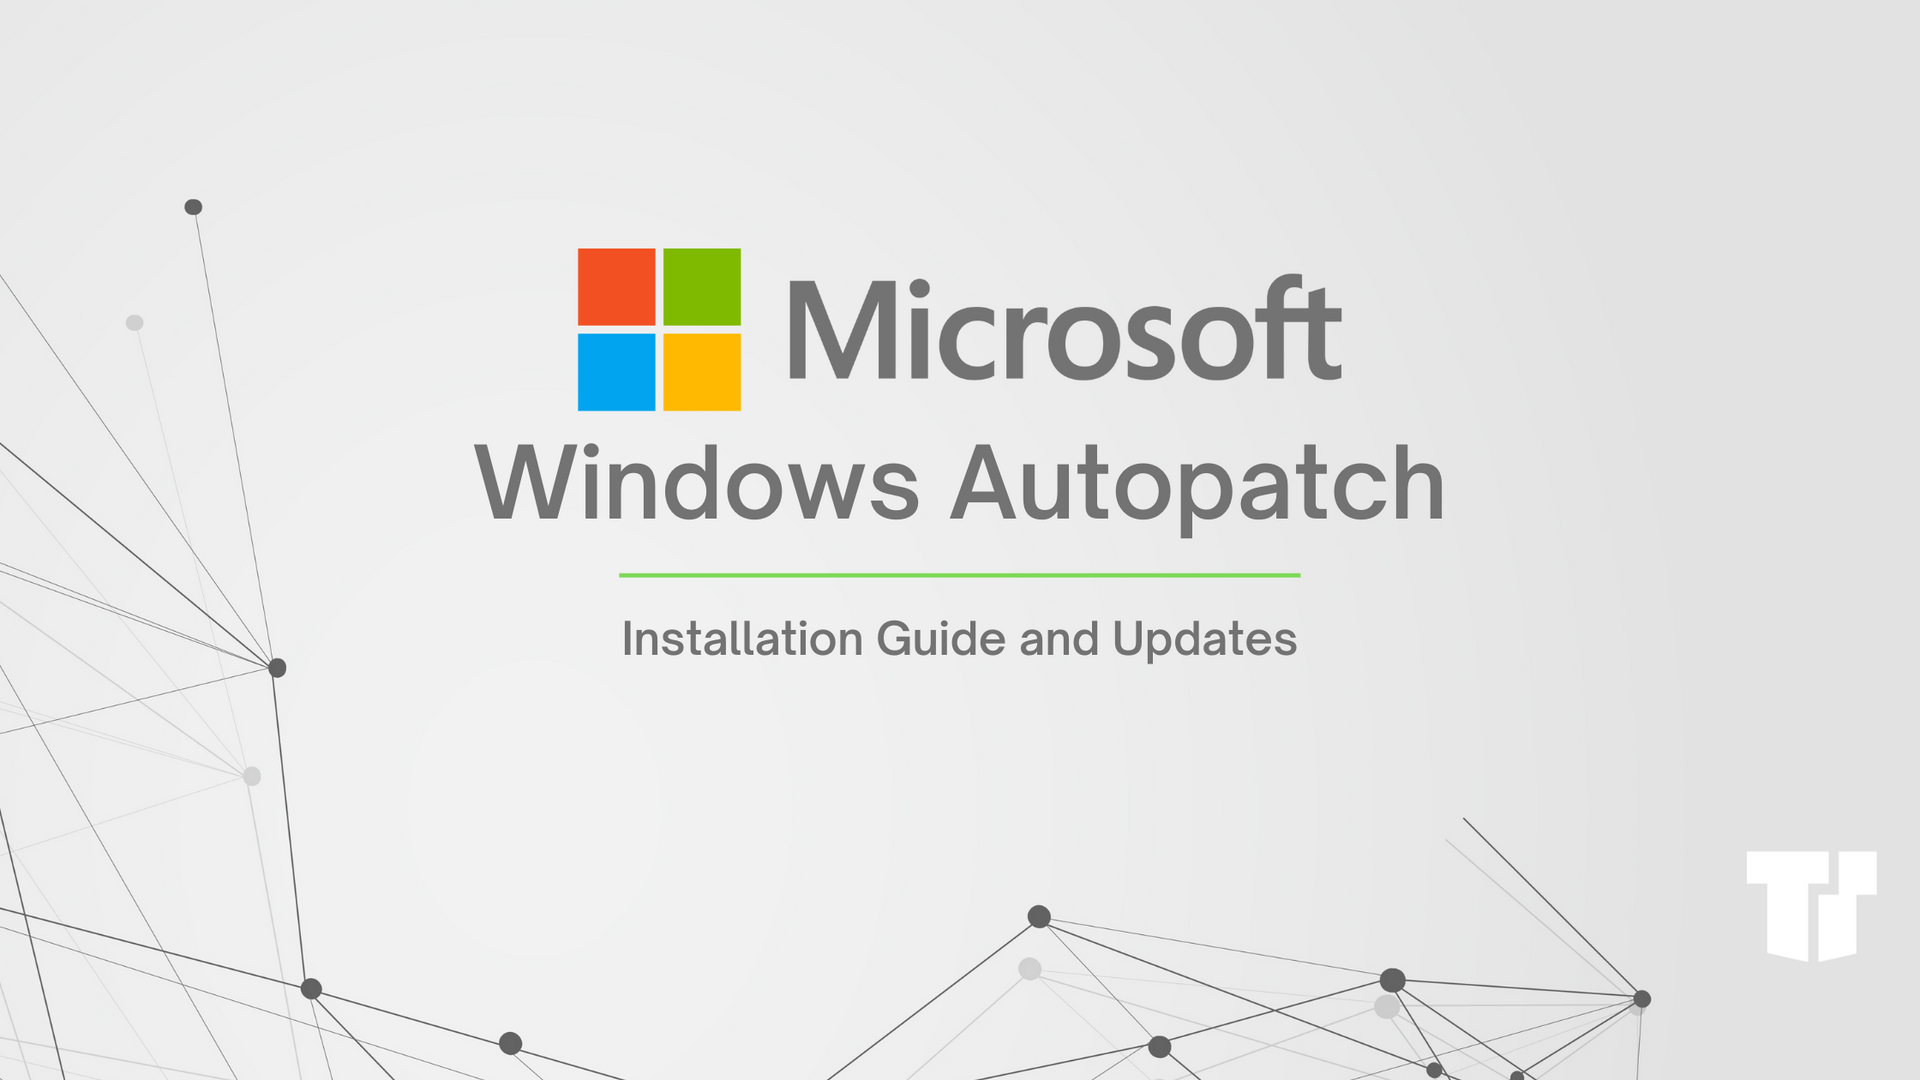 Microsoft Announces Autopatch Following Patch Tuesday cover image